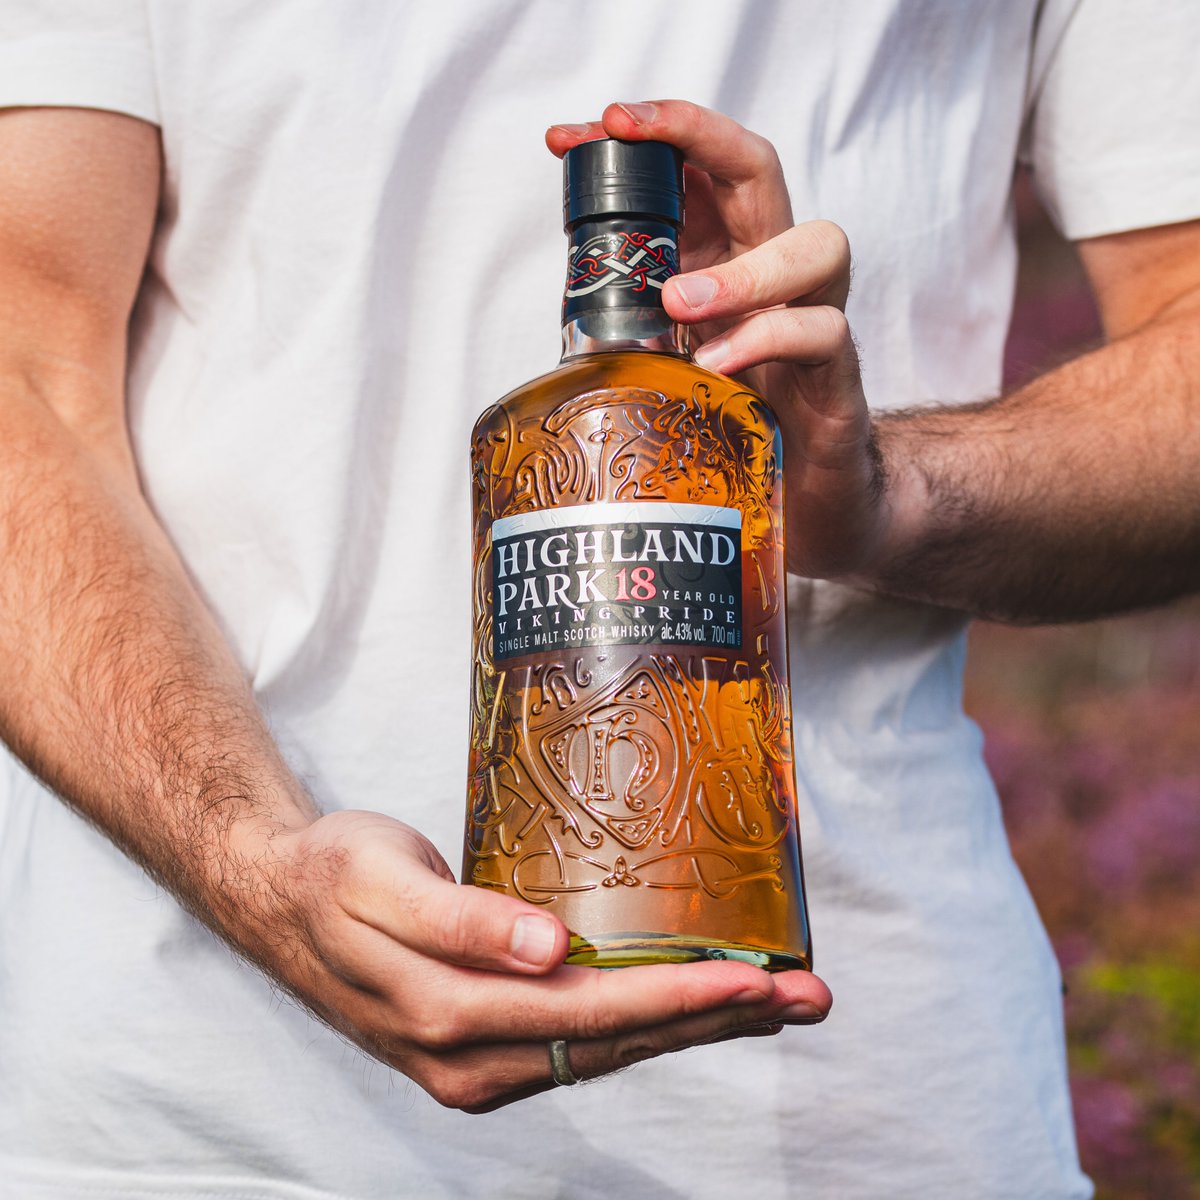 The perfect gift for whisky lovers this festive season, Highland Park 18 Year Old is full-bodied & refined, packed full of notes of dark chocolate, orange zest, and fragrant Orcadian peat smoke. #HighlandParkWhisky Please enjoy Highland Park responsibly.